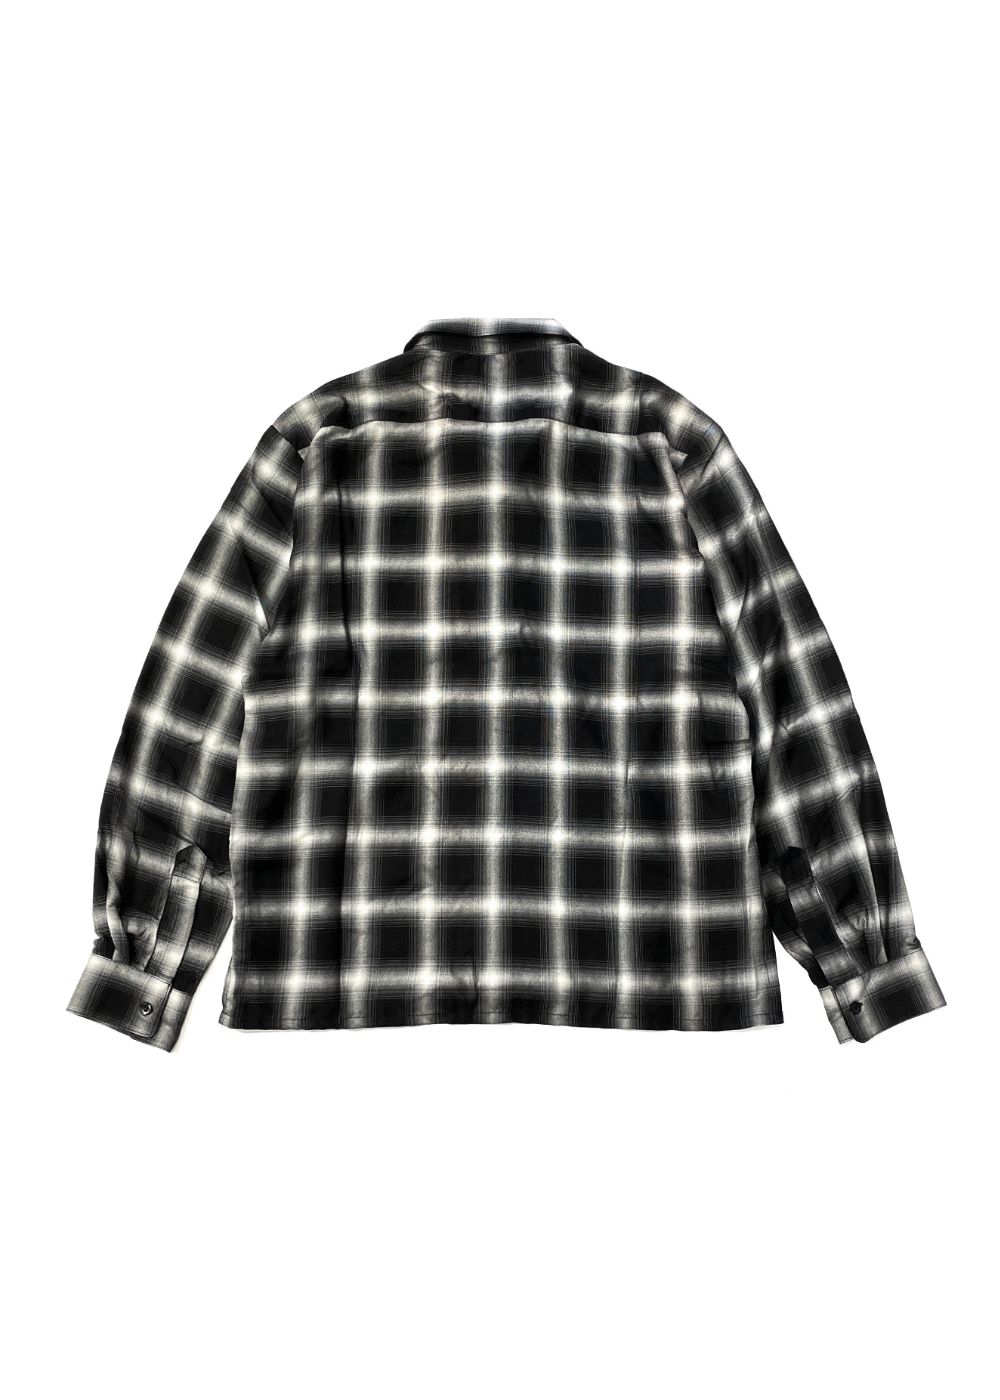 HIDE AND SEEK - OMBRE CHECK L/S SHIRT (BLACK) / オンブレチェック